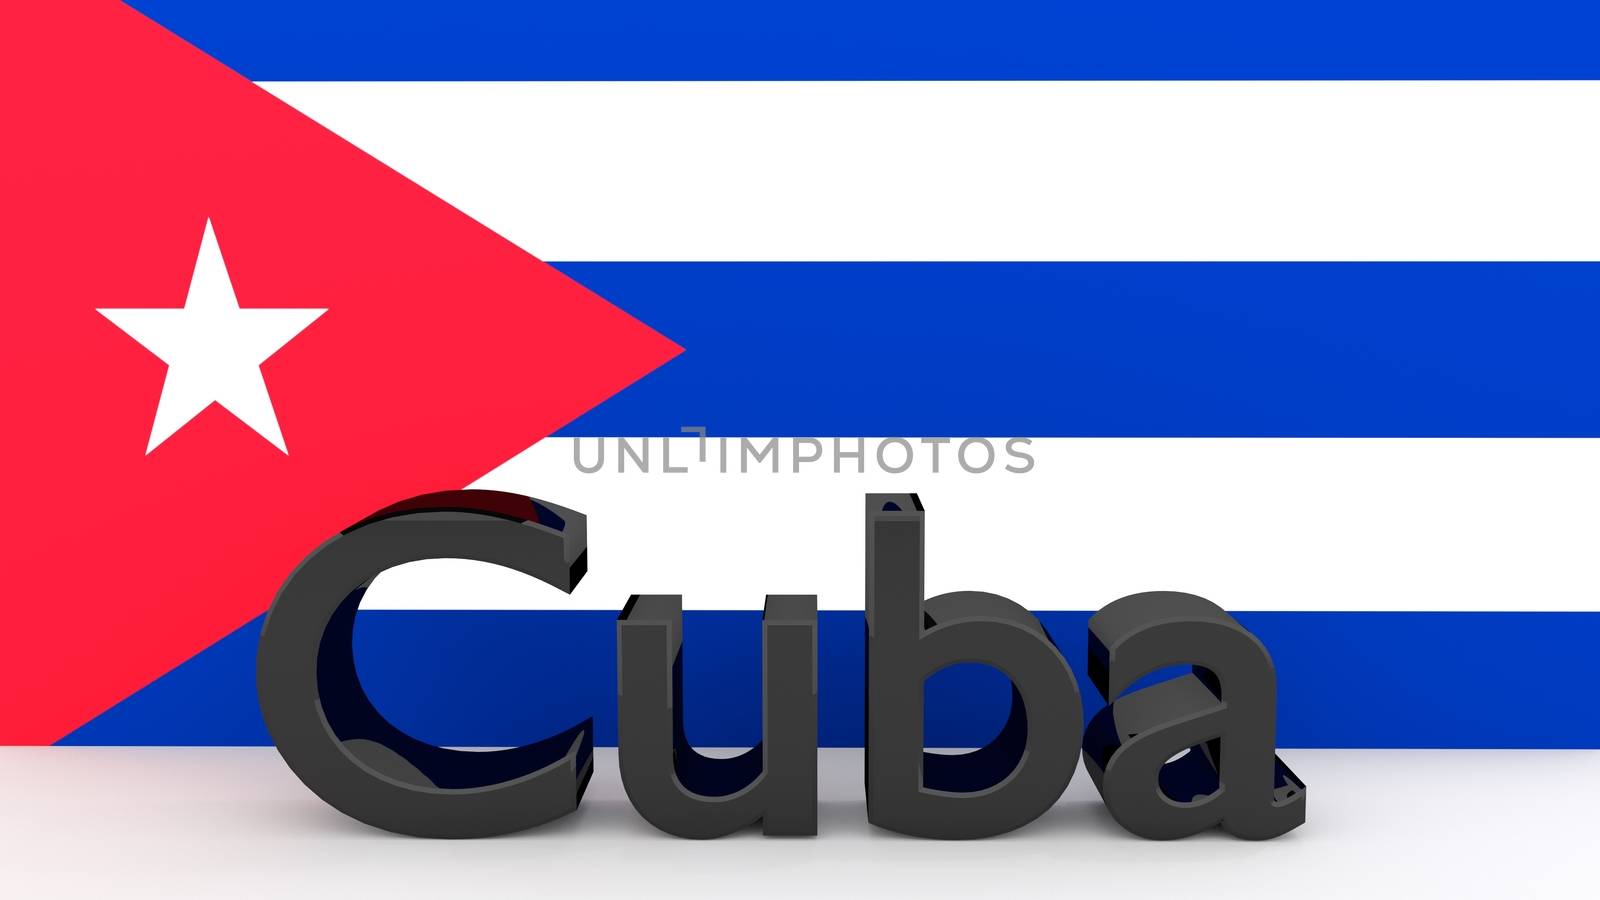 Writing Cuba front of a cuban flag by MarkDw